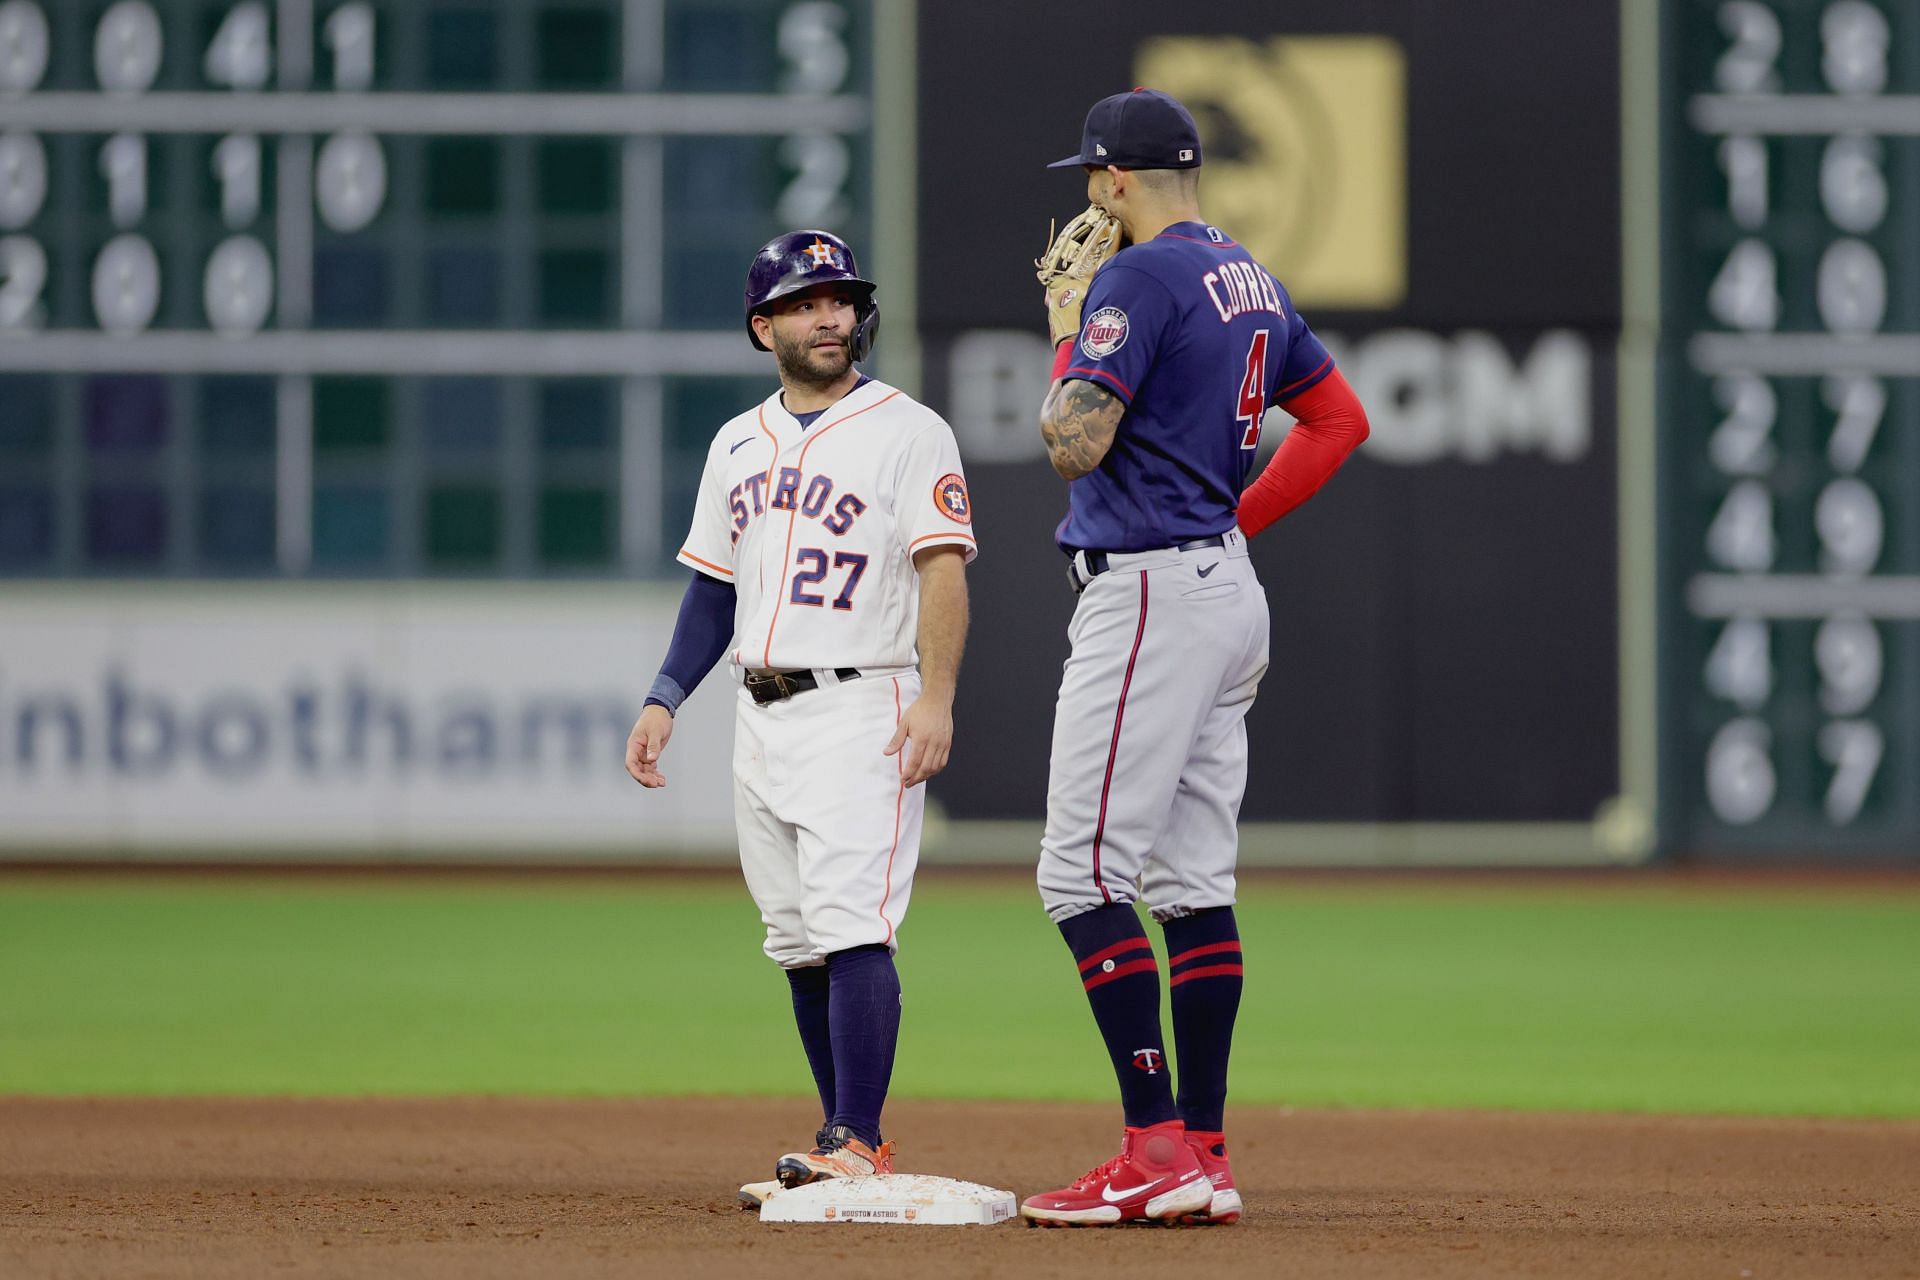 Jose Altuve speaks with Carlos Correa during the fifth inning during a game at Minute Maid Park